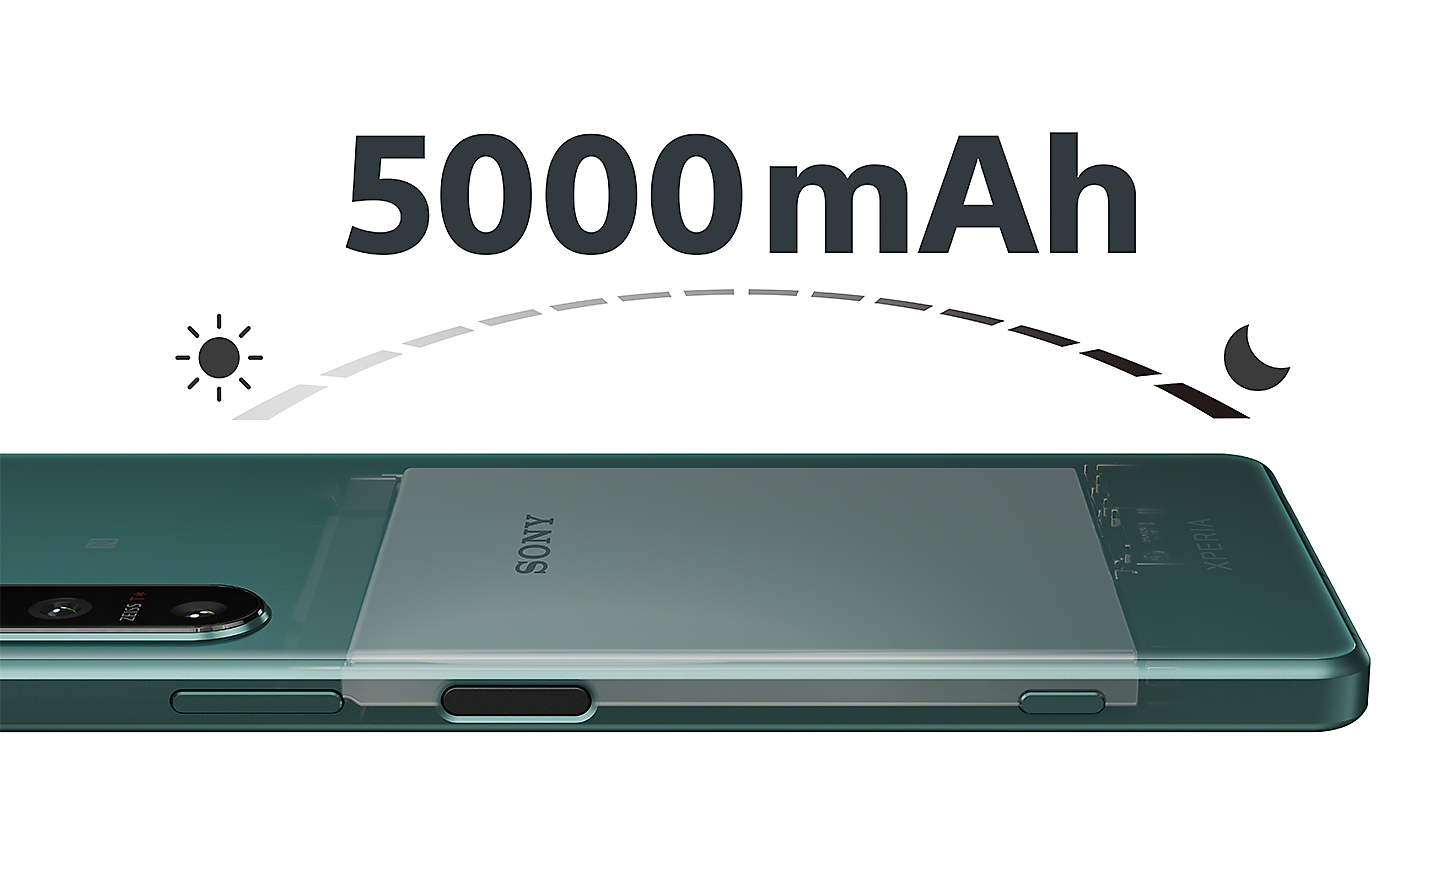 X-ray image of Xperia 5 IV showing large battery, plus logo for 5000mAh and graphic signifying day-to-night